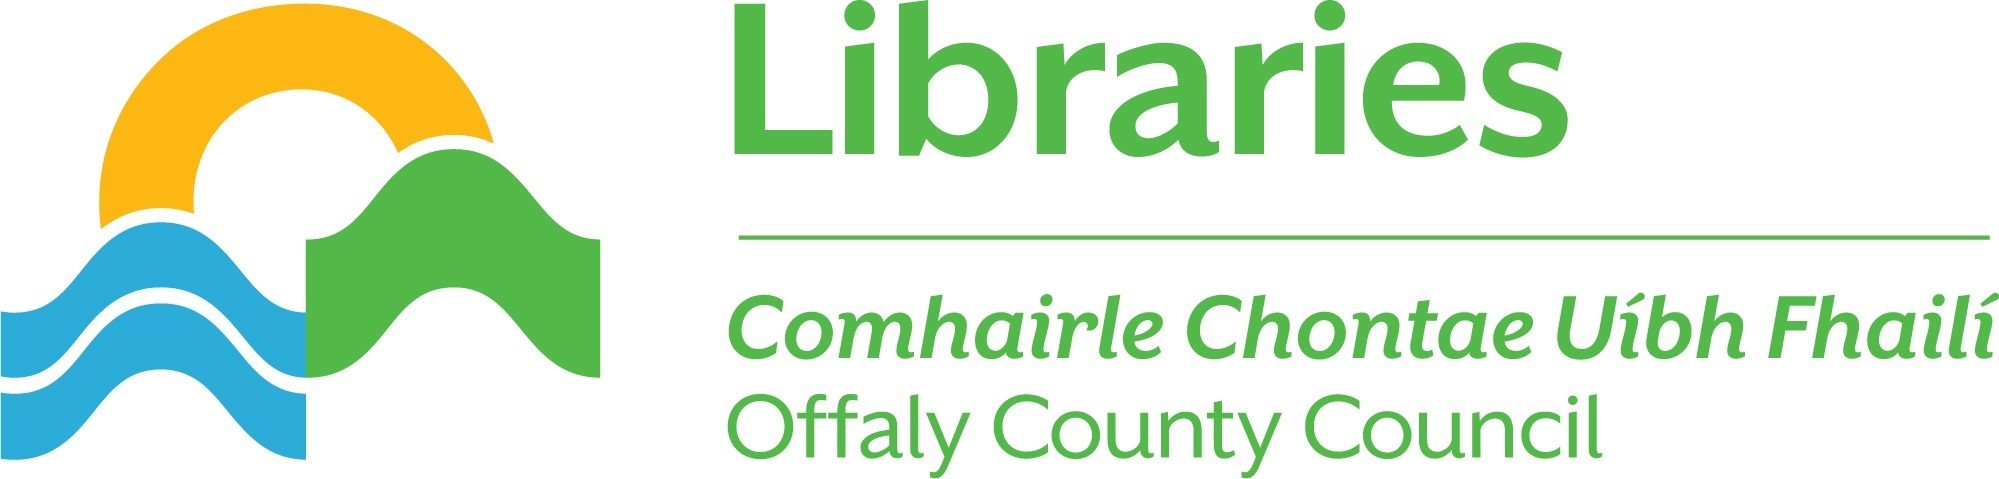 Offaly Libraries Blog